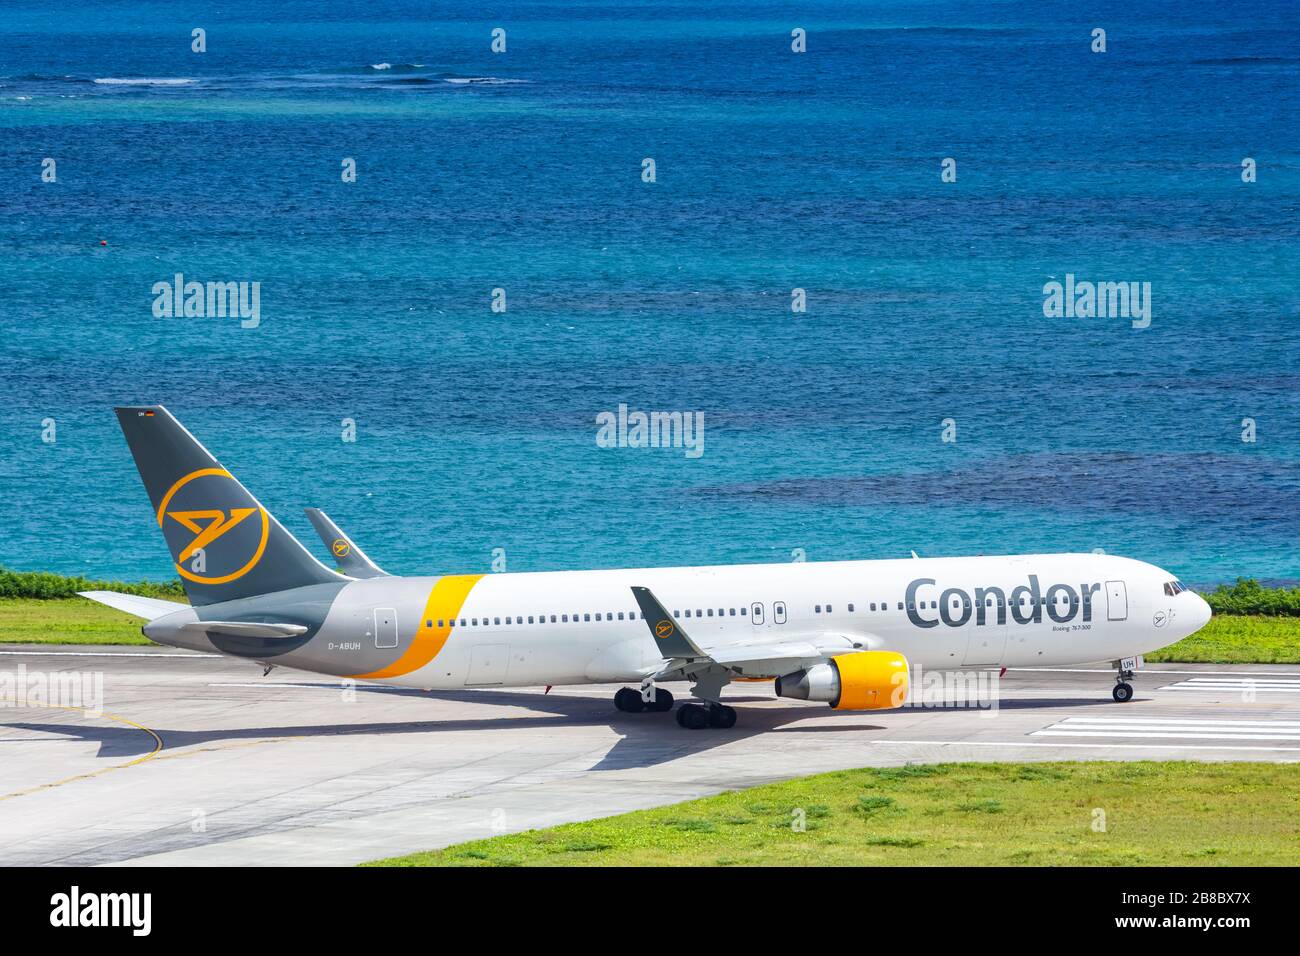 Mahe, Seychelles – February 8, 2020: Condor Boeing 767-300ER airplane at Mahe airport (SEZ) in the Seychelles. Boeing is an American aircraft manufact Stock Photo